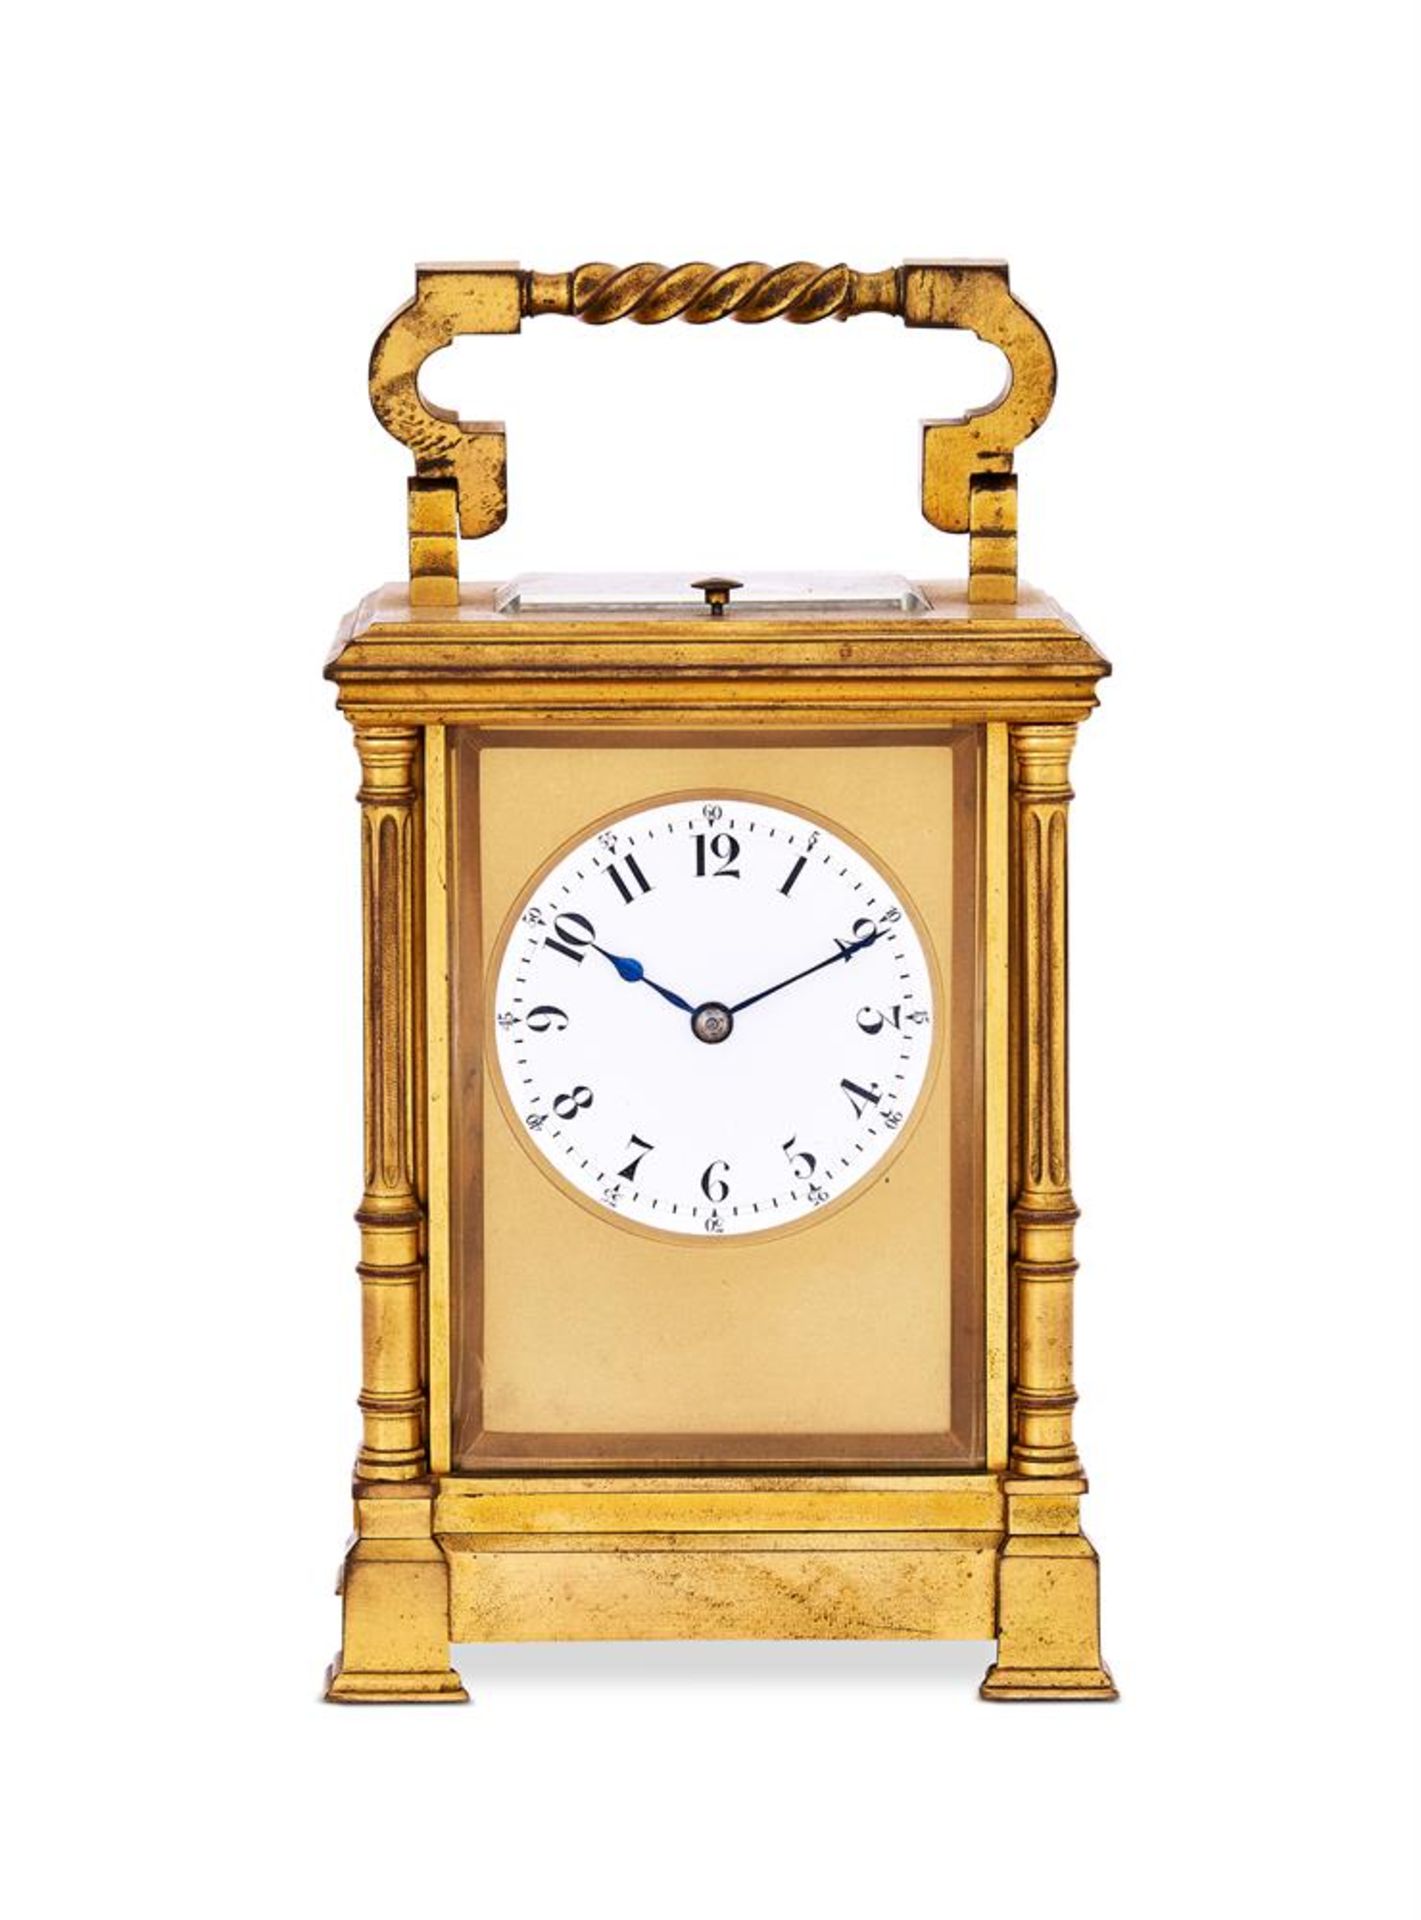 A FRENCH LACQUERED-BRASS CARRIAGE CLOCK LATE 19TH CENTURY